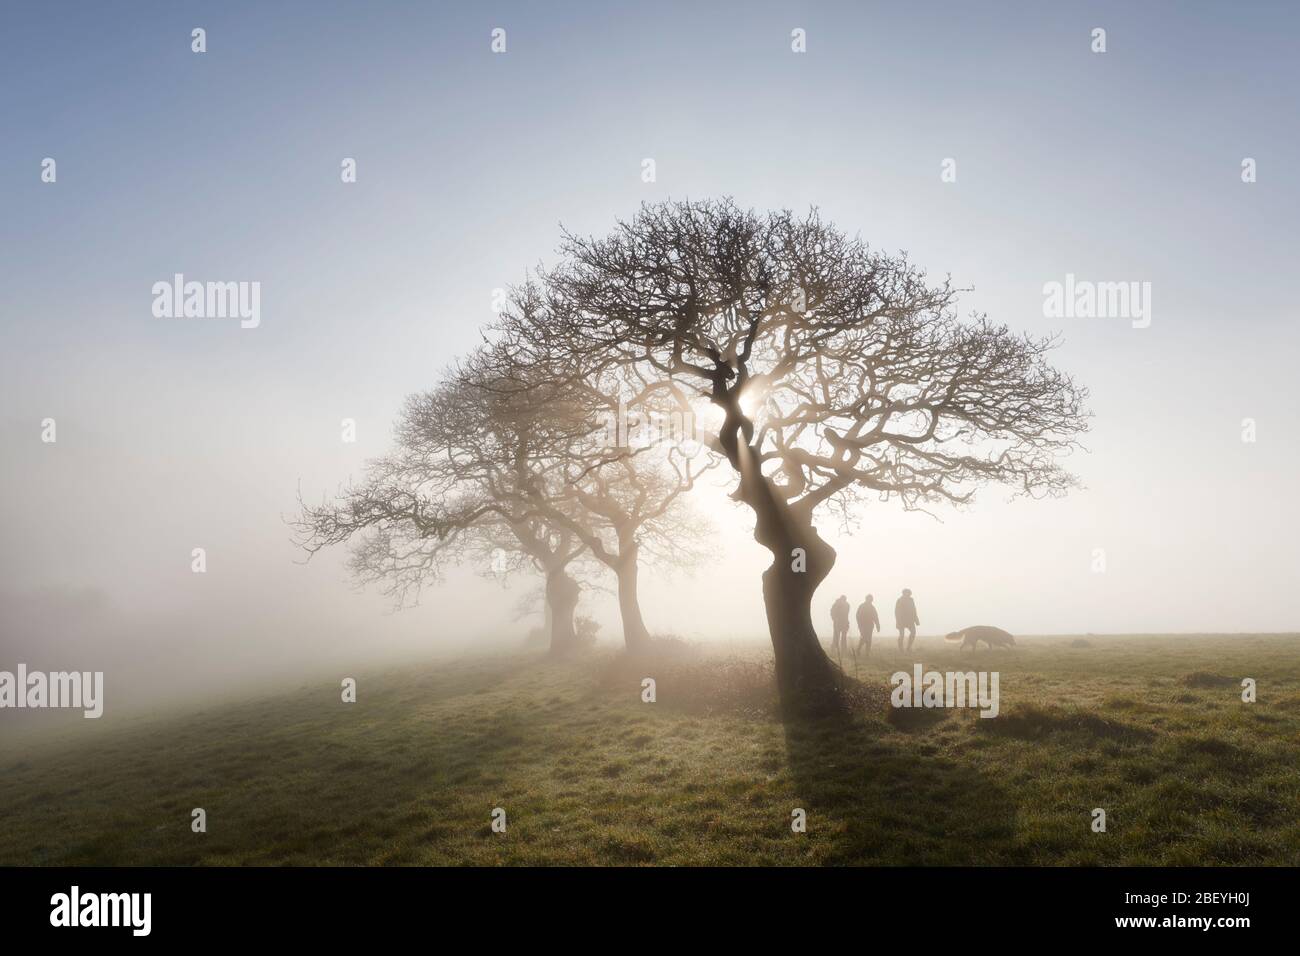 Walking with the dog on a calm misty morning Stock Photo